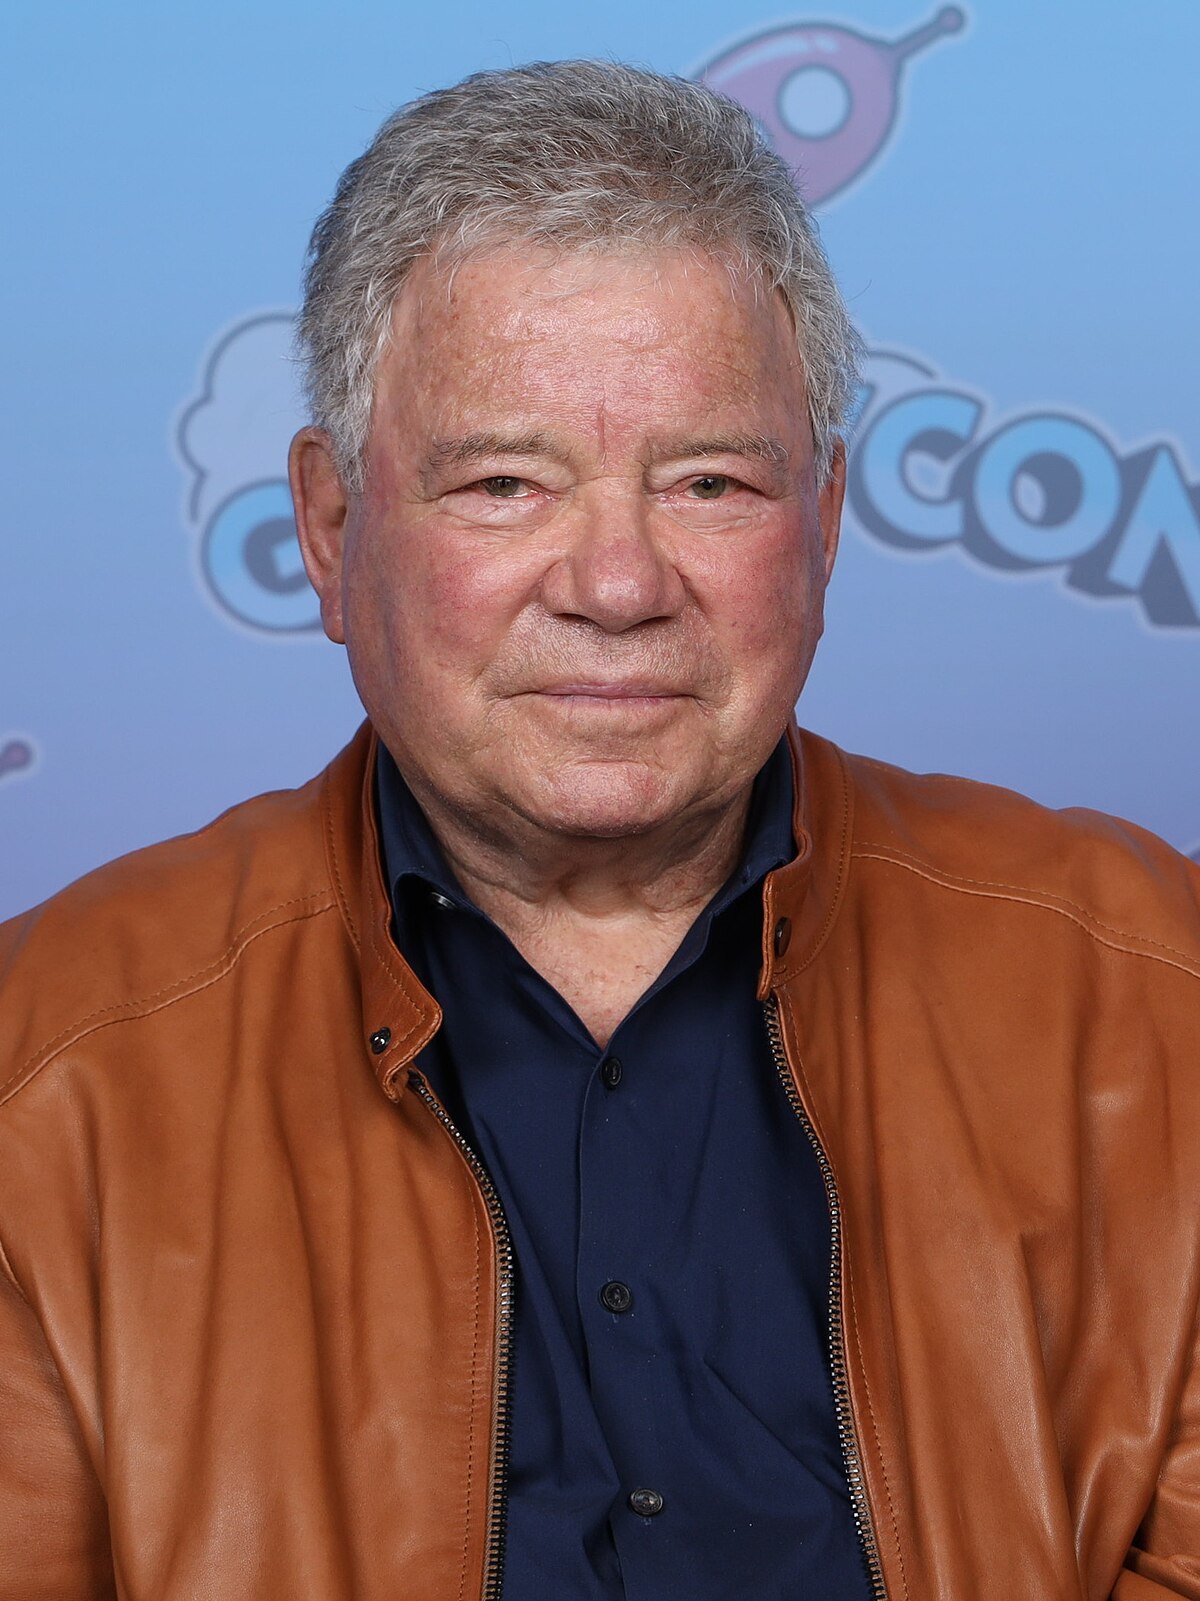 William Shatner as a christian